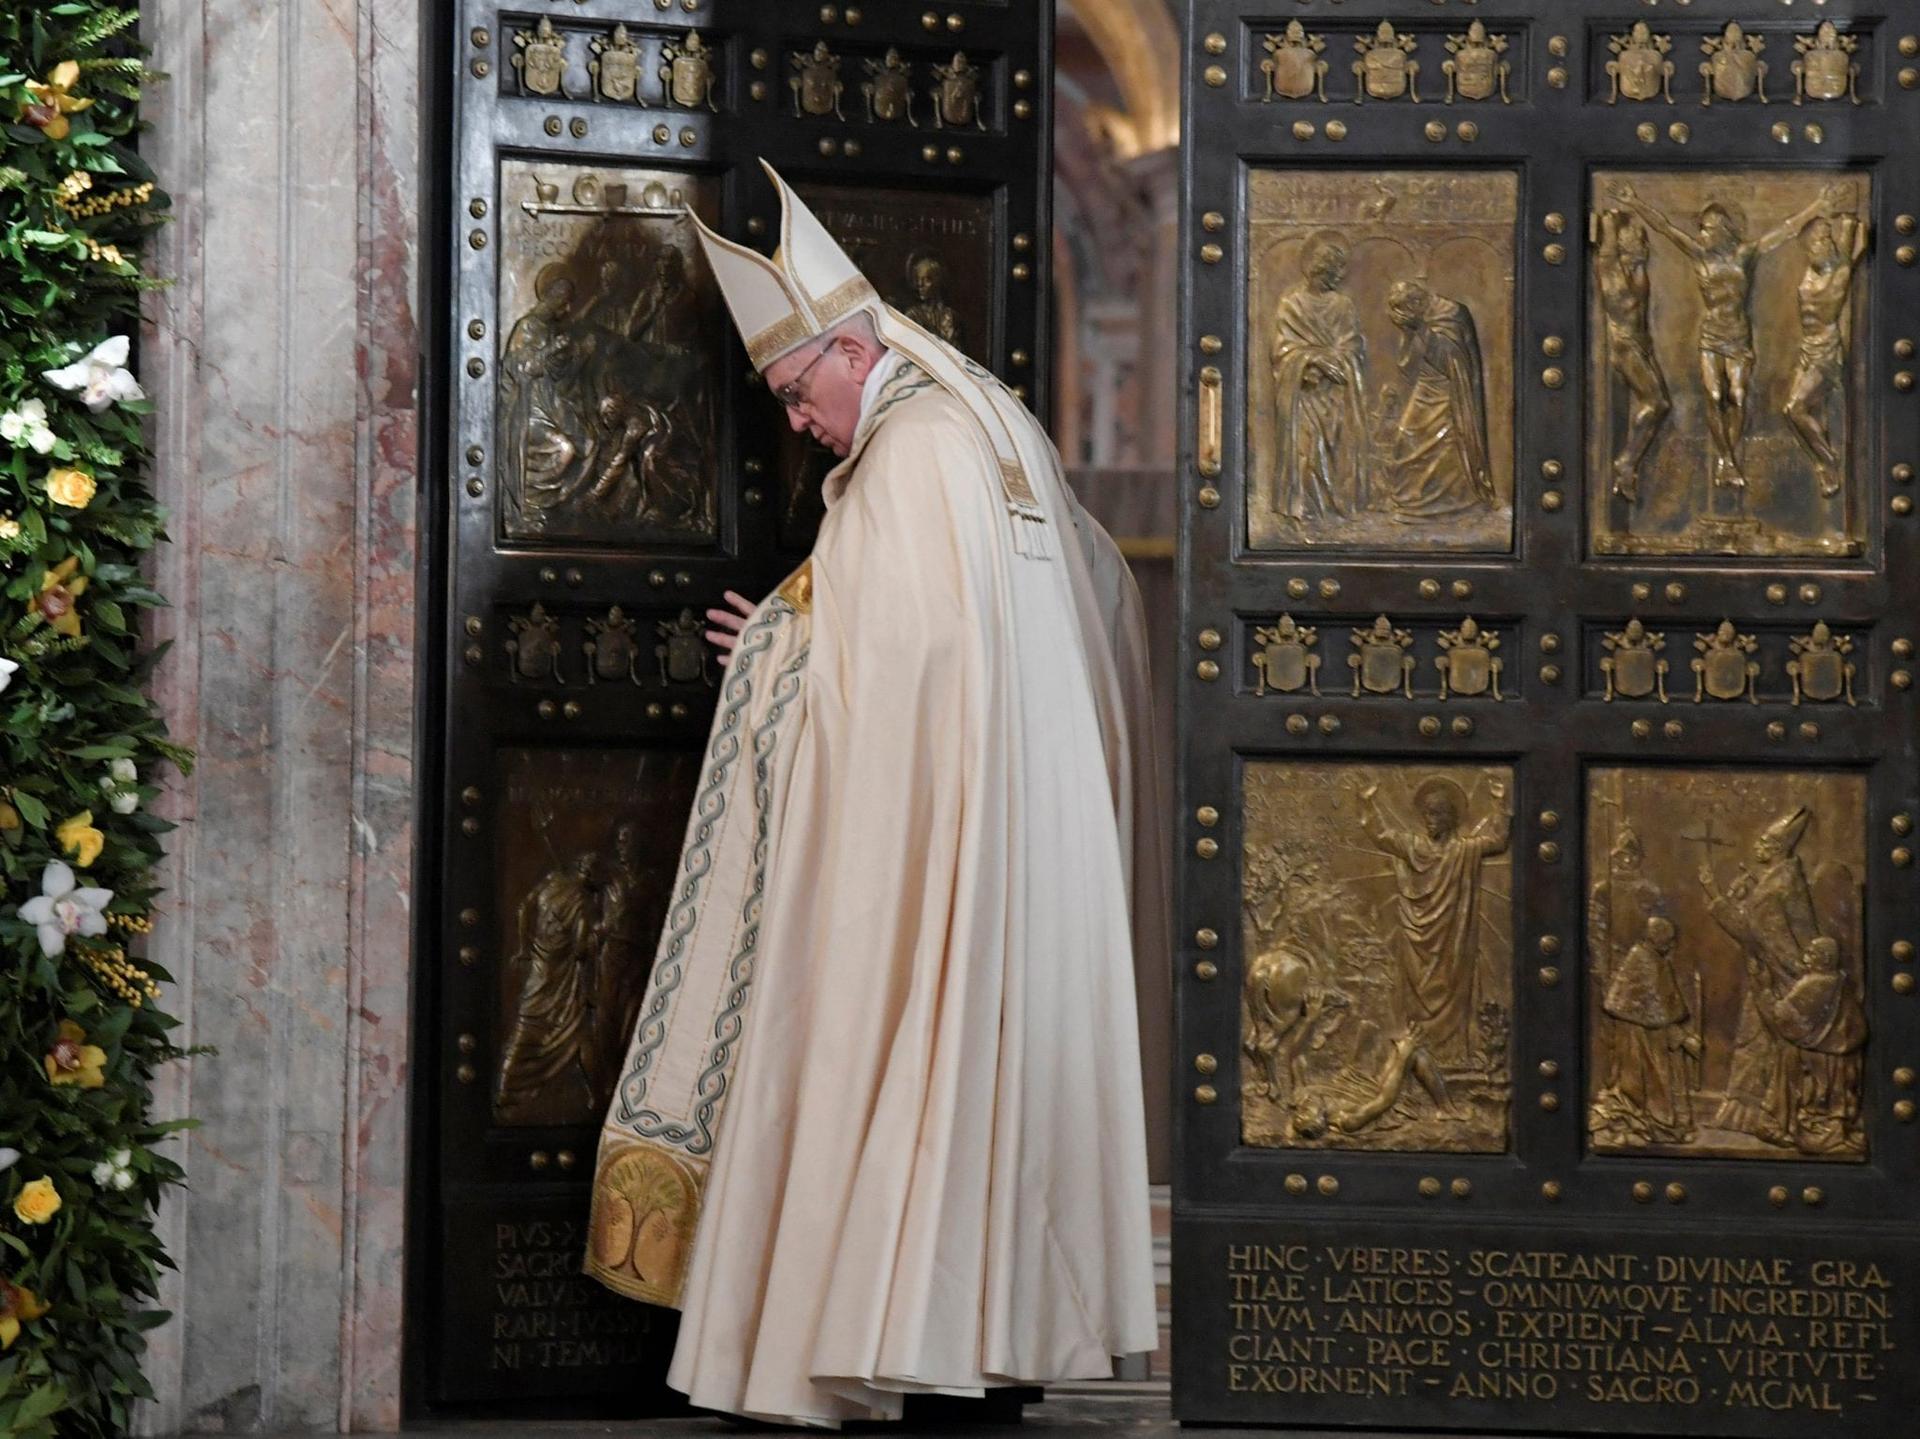 A look back at some key moments of the Year of Mercy